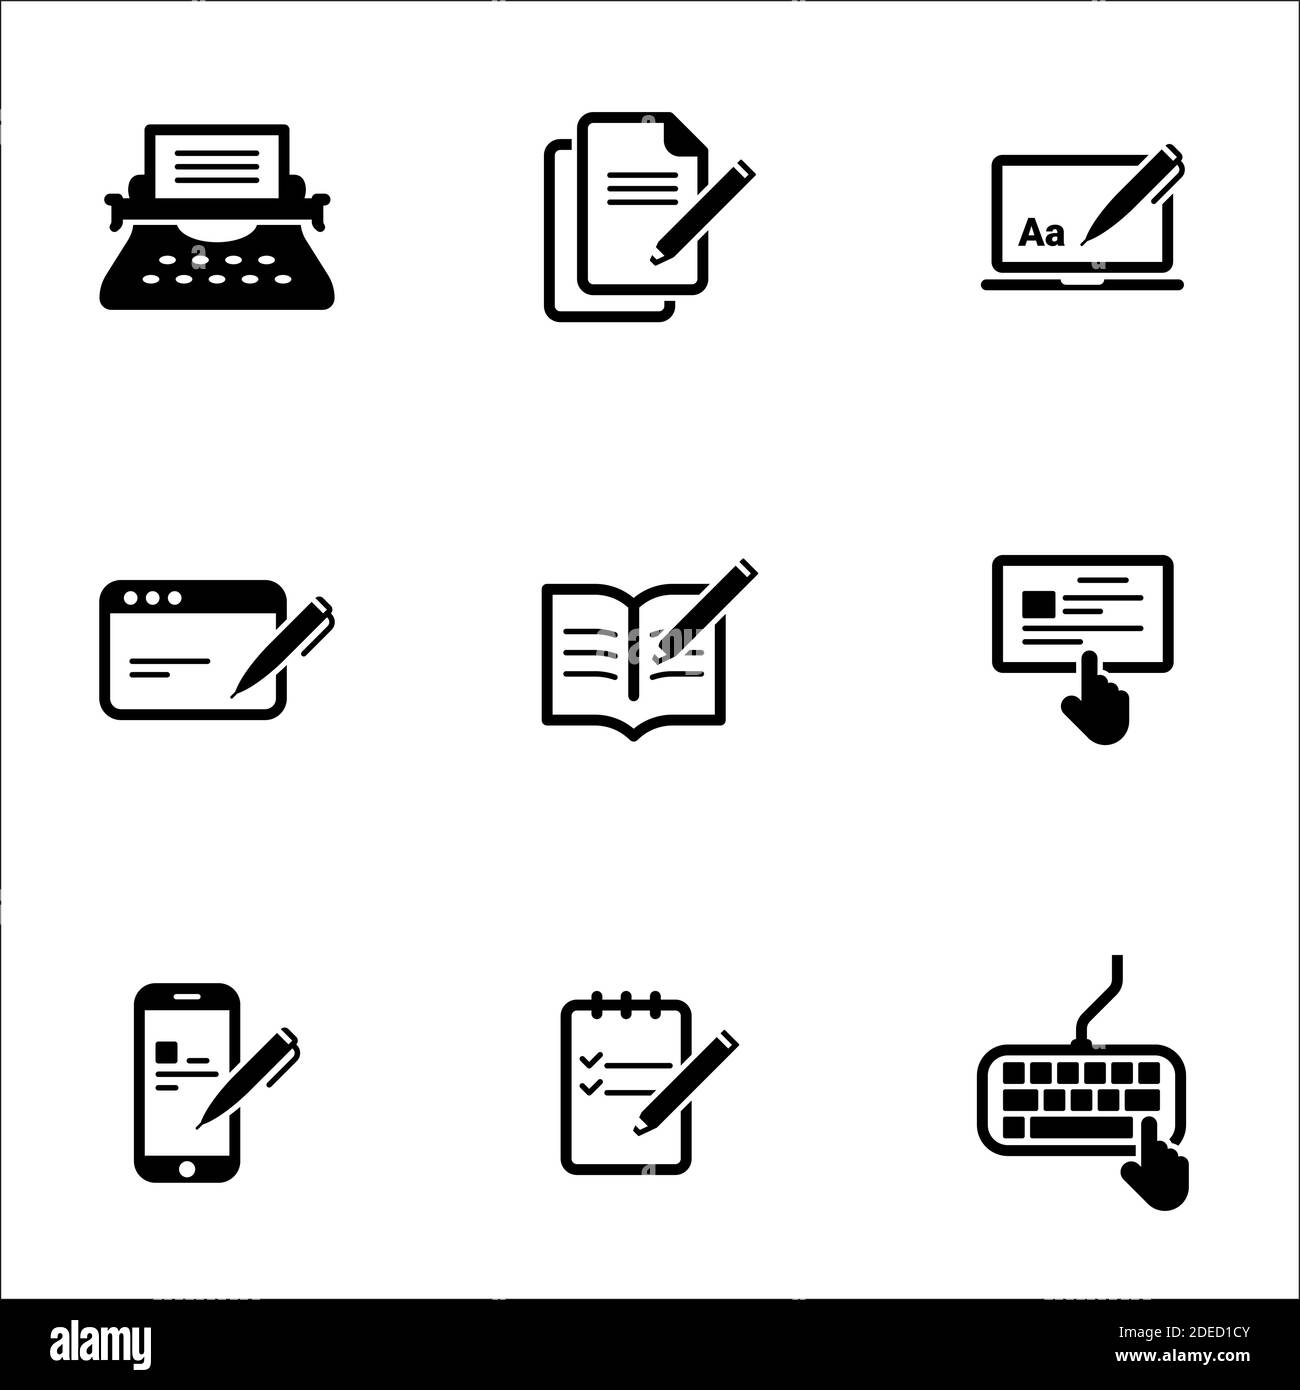 Set of simple icons on a theme Copywriting, vector, design, collection, flat, sign, symbol,element, object, illustration, isolated. White background Stock Vector